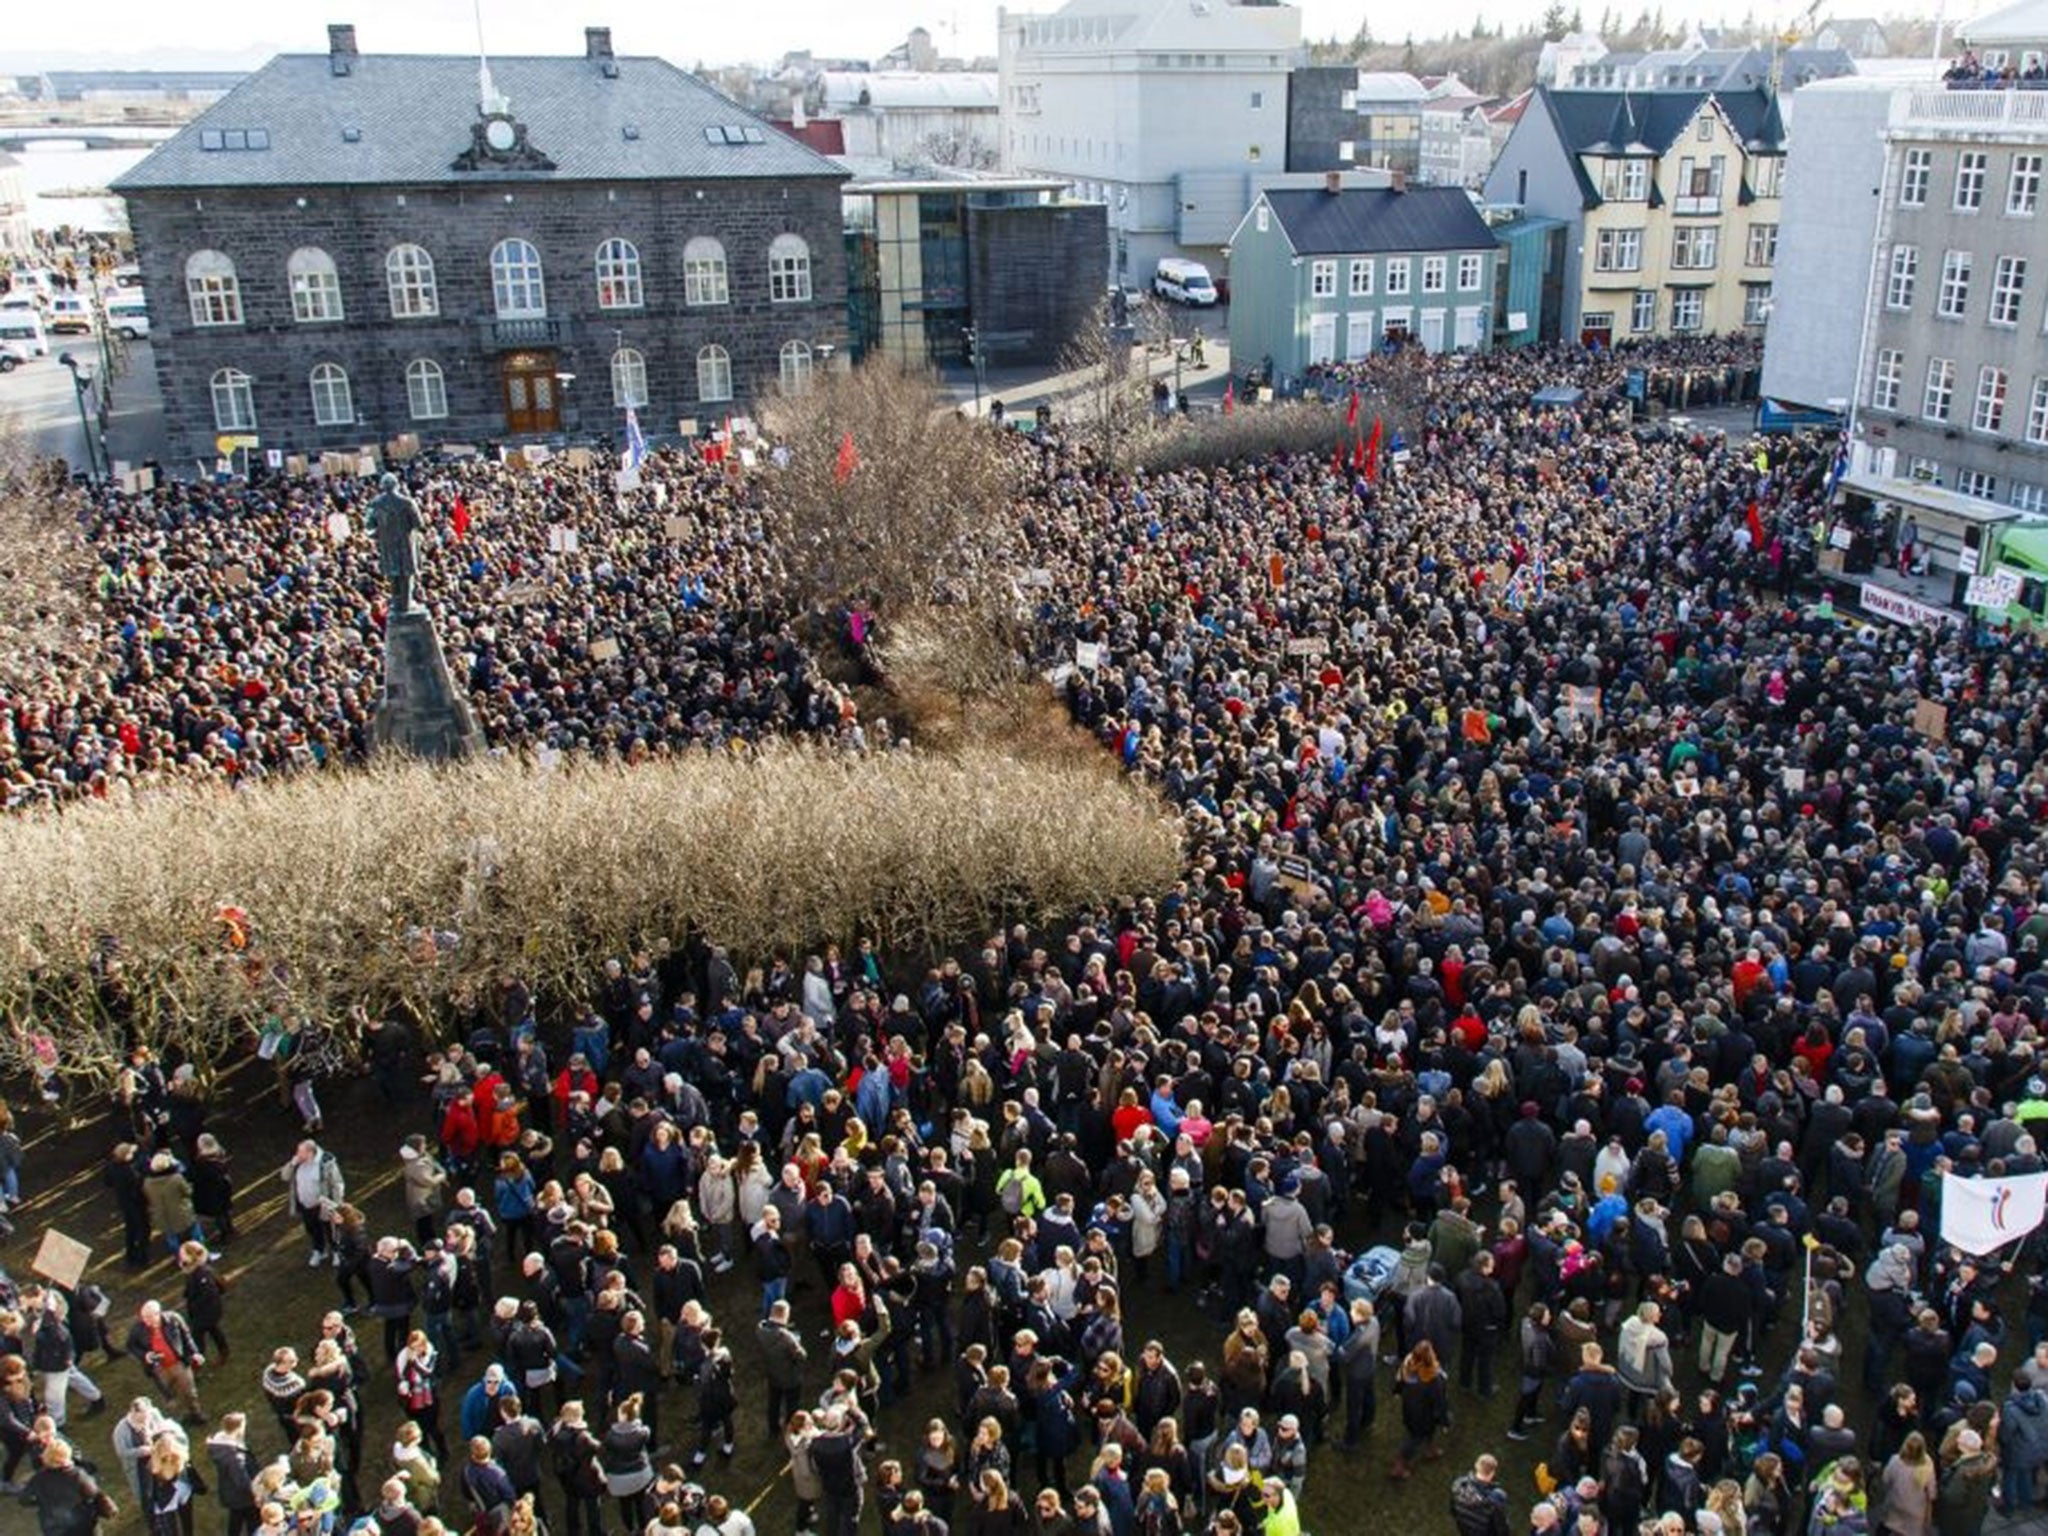 People gather during a protest on Austurvollur Square in front of the Icelandic Parliament in Reykjavic, Iceland, calling for the resignation of prime minister Sigmundur Davíð Gunnlaugsson on 04 April, 2016,